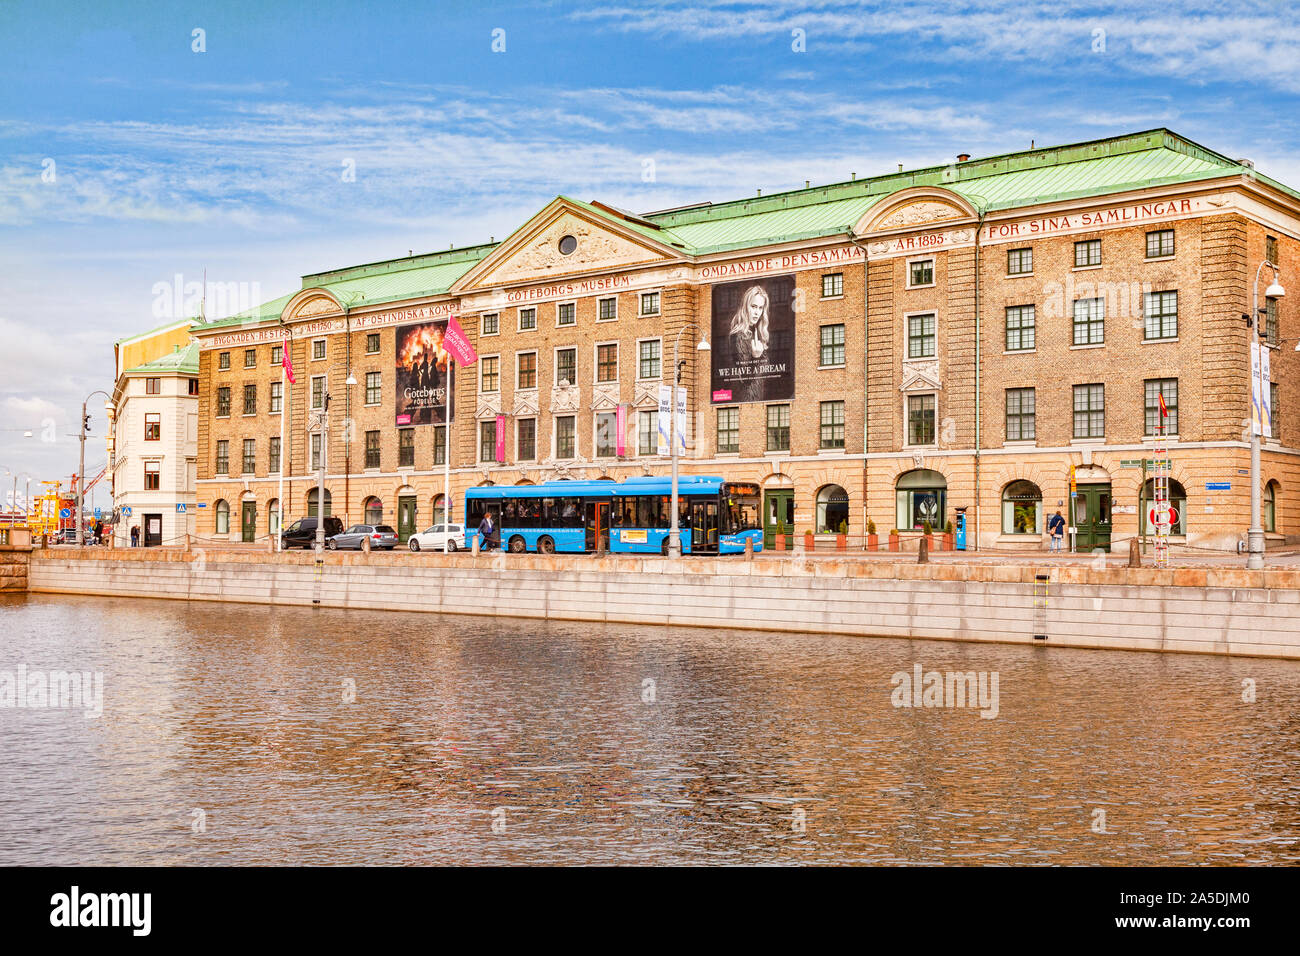 14 September 2018: Gothenburg, Sweden - The Gothenburg City  Museum beside the Stora Hamn Canal, ia a museum of Swedish cultural history, from the tim Stock Photo